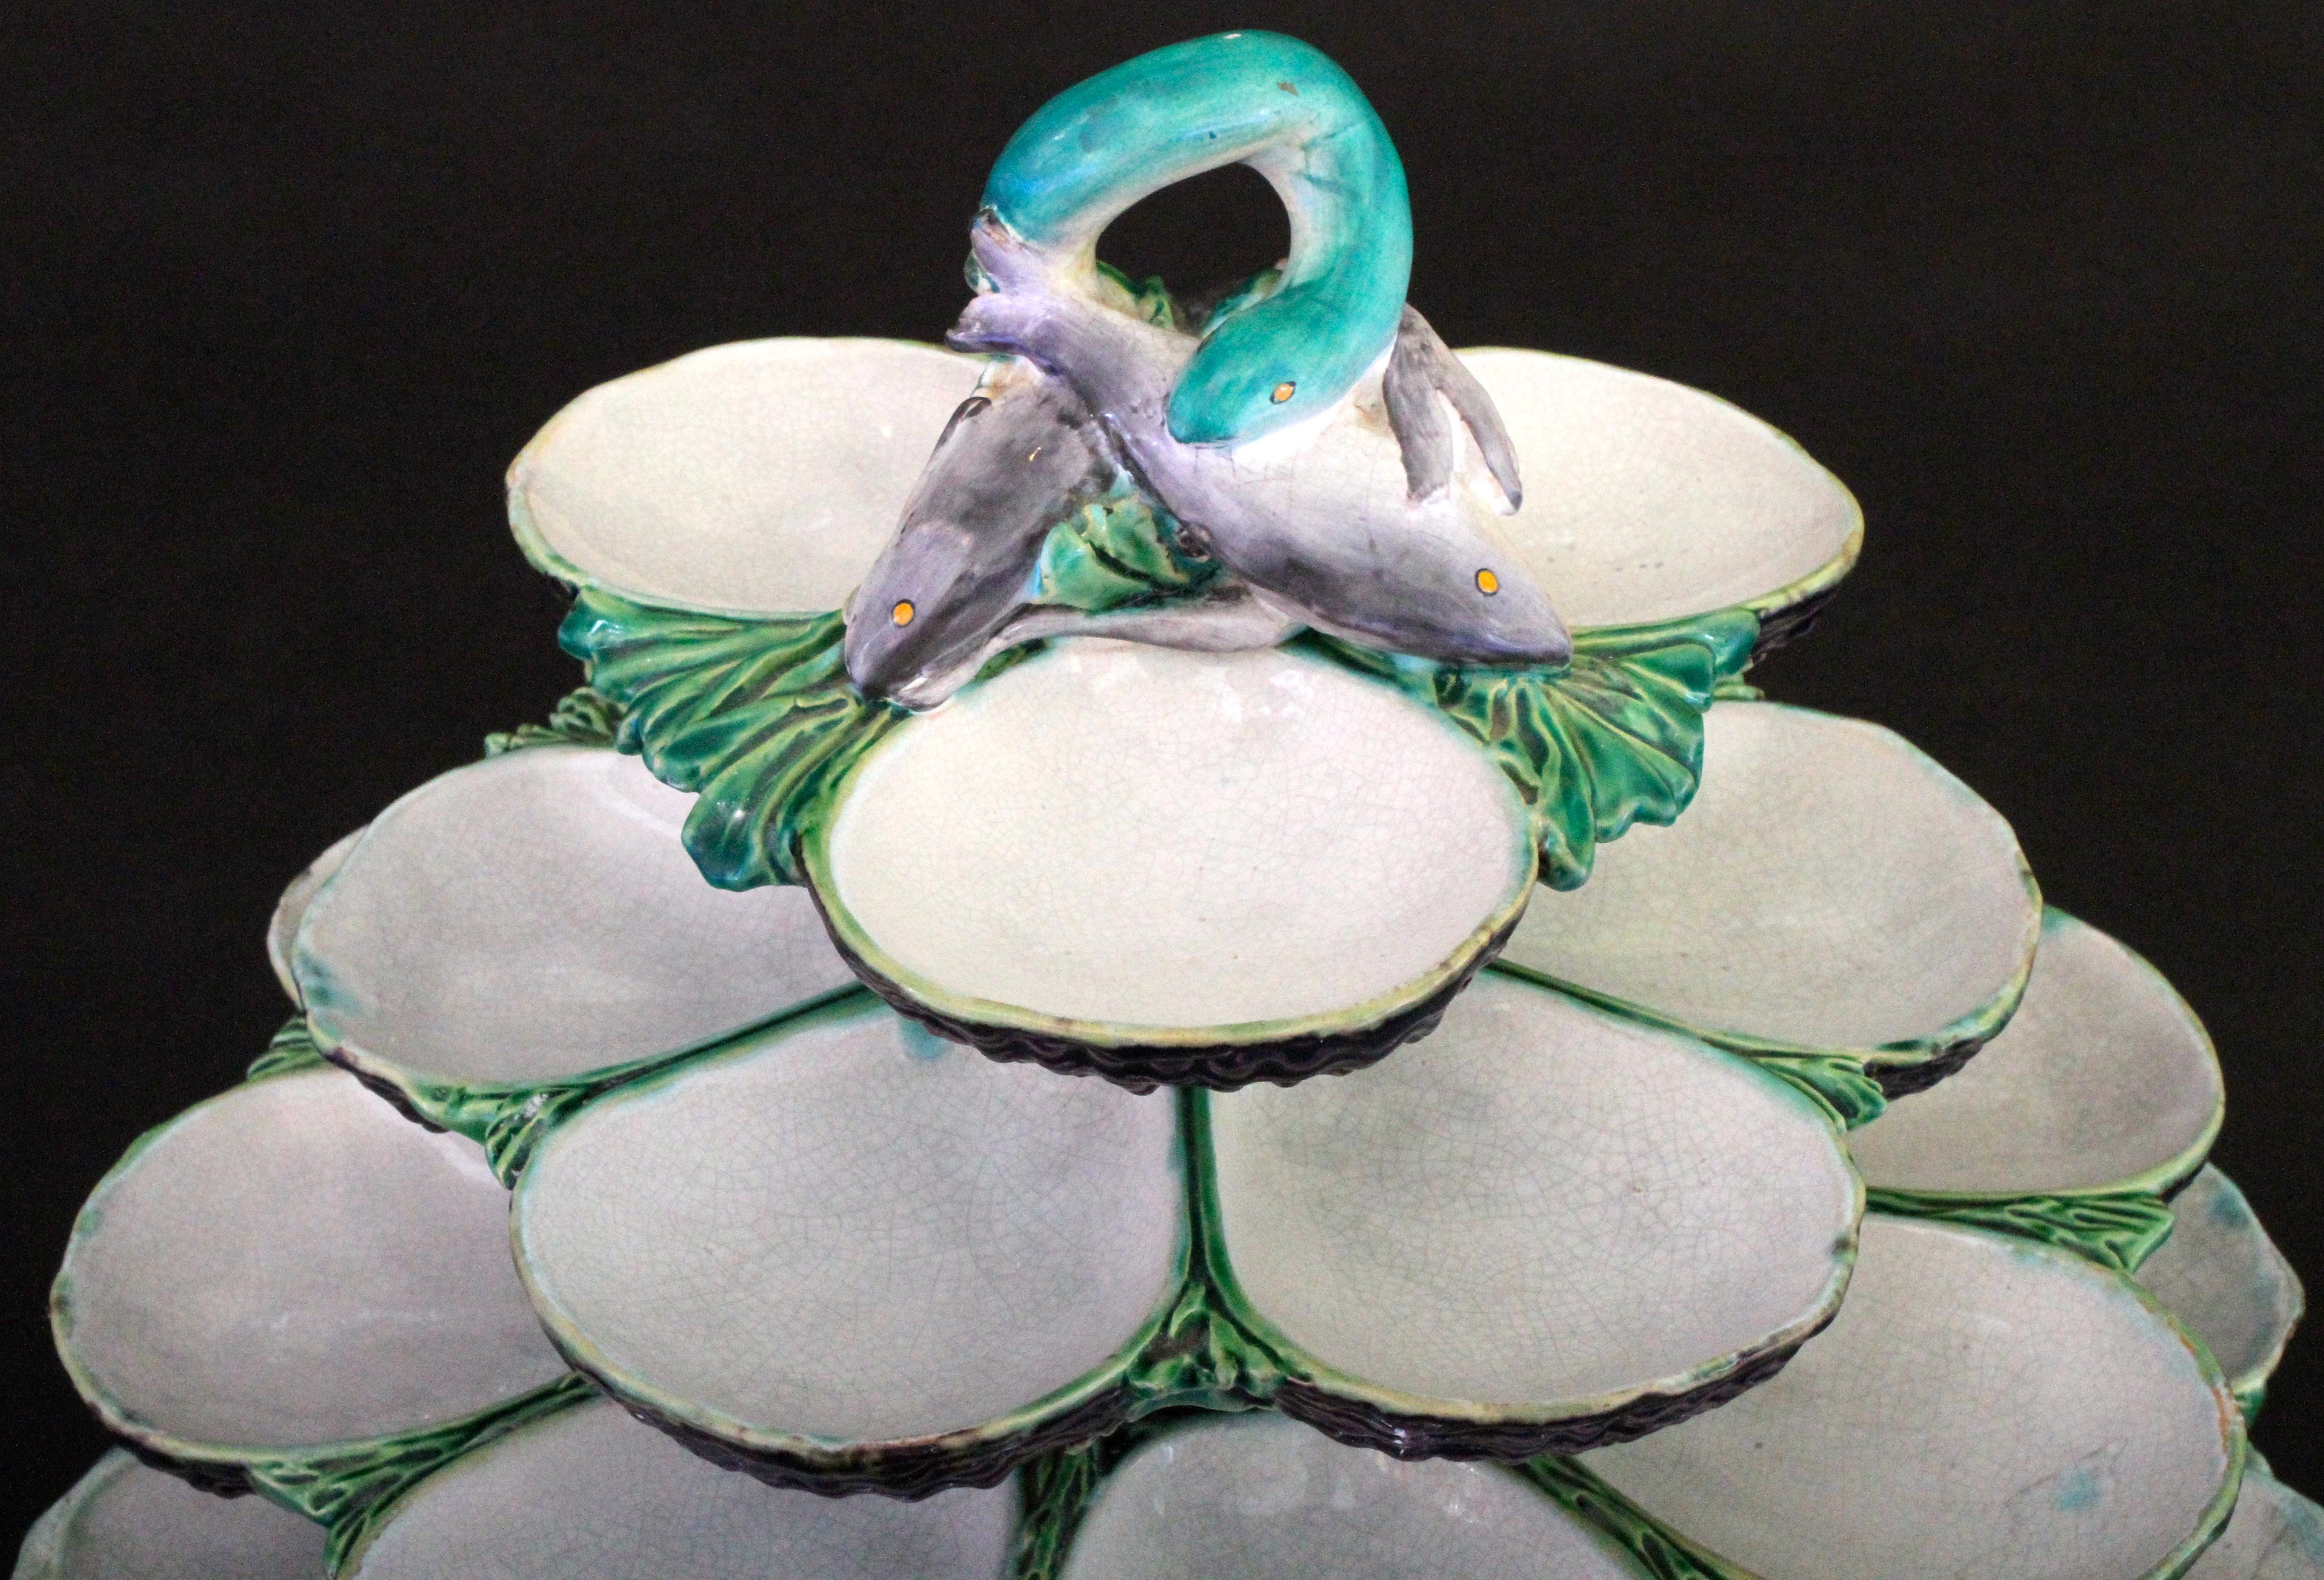 19th Century Minton Majolica Revolving Oyster Server In Good Condition For Sale In New York, NY